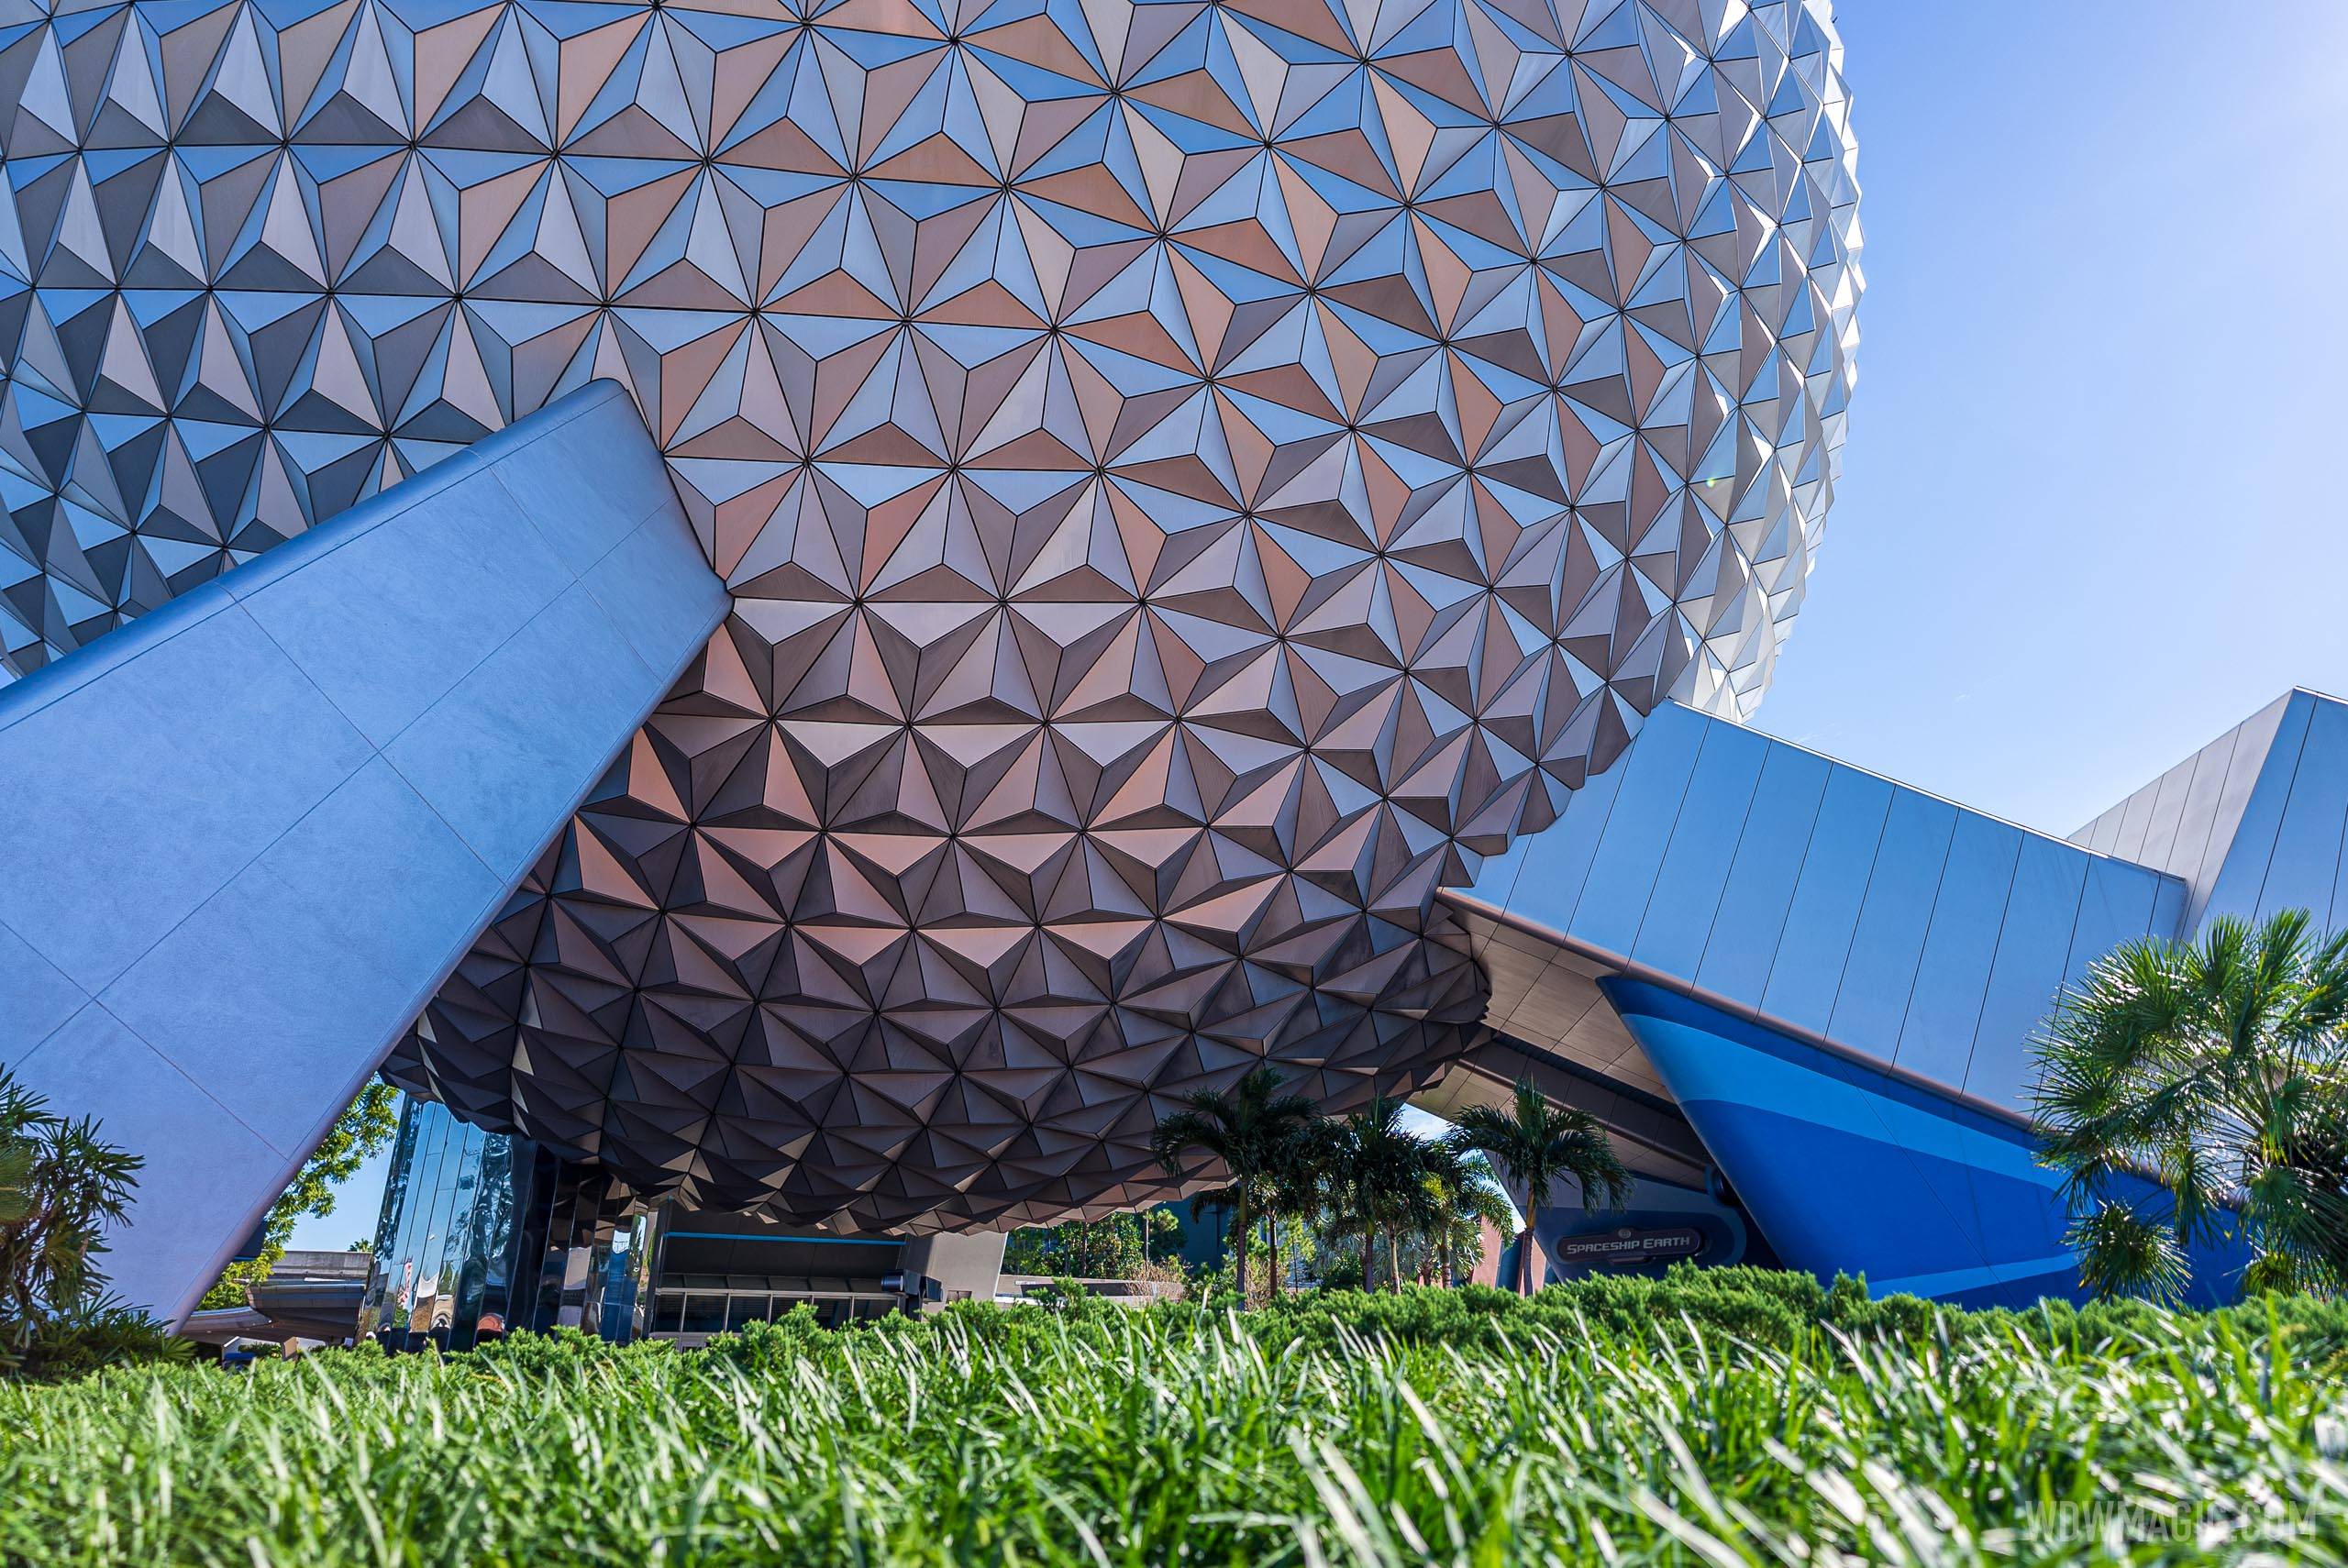 EPCOT will see regular 10pm closes during October